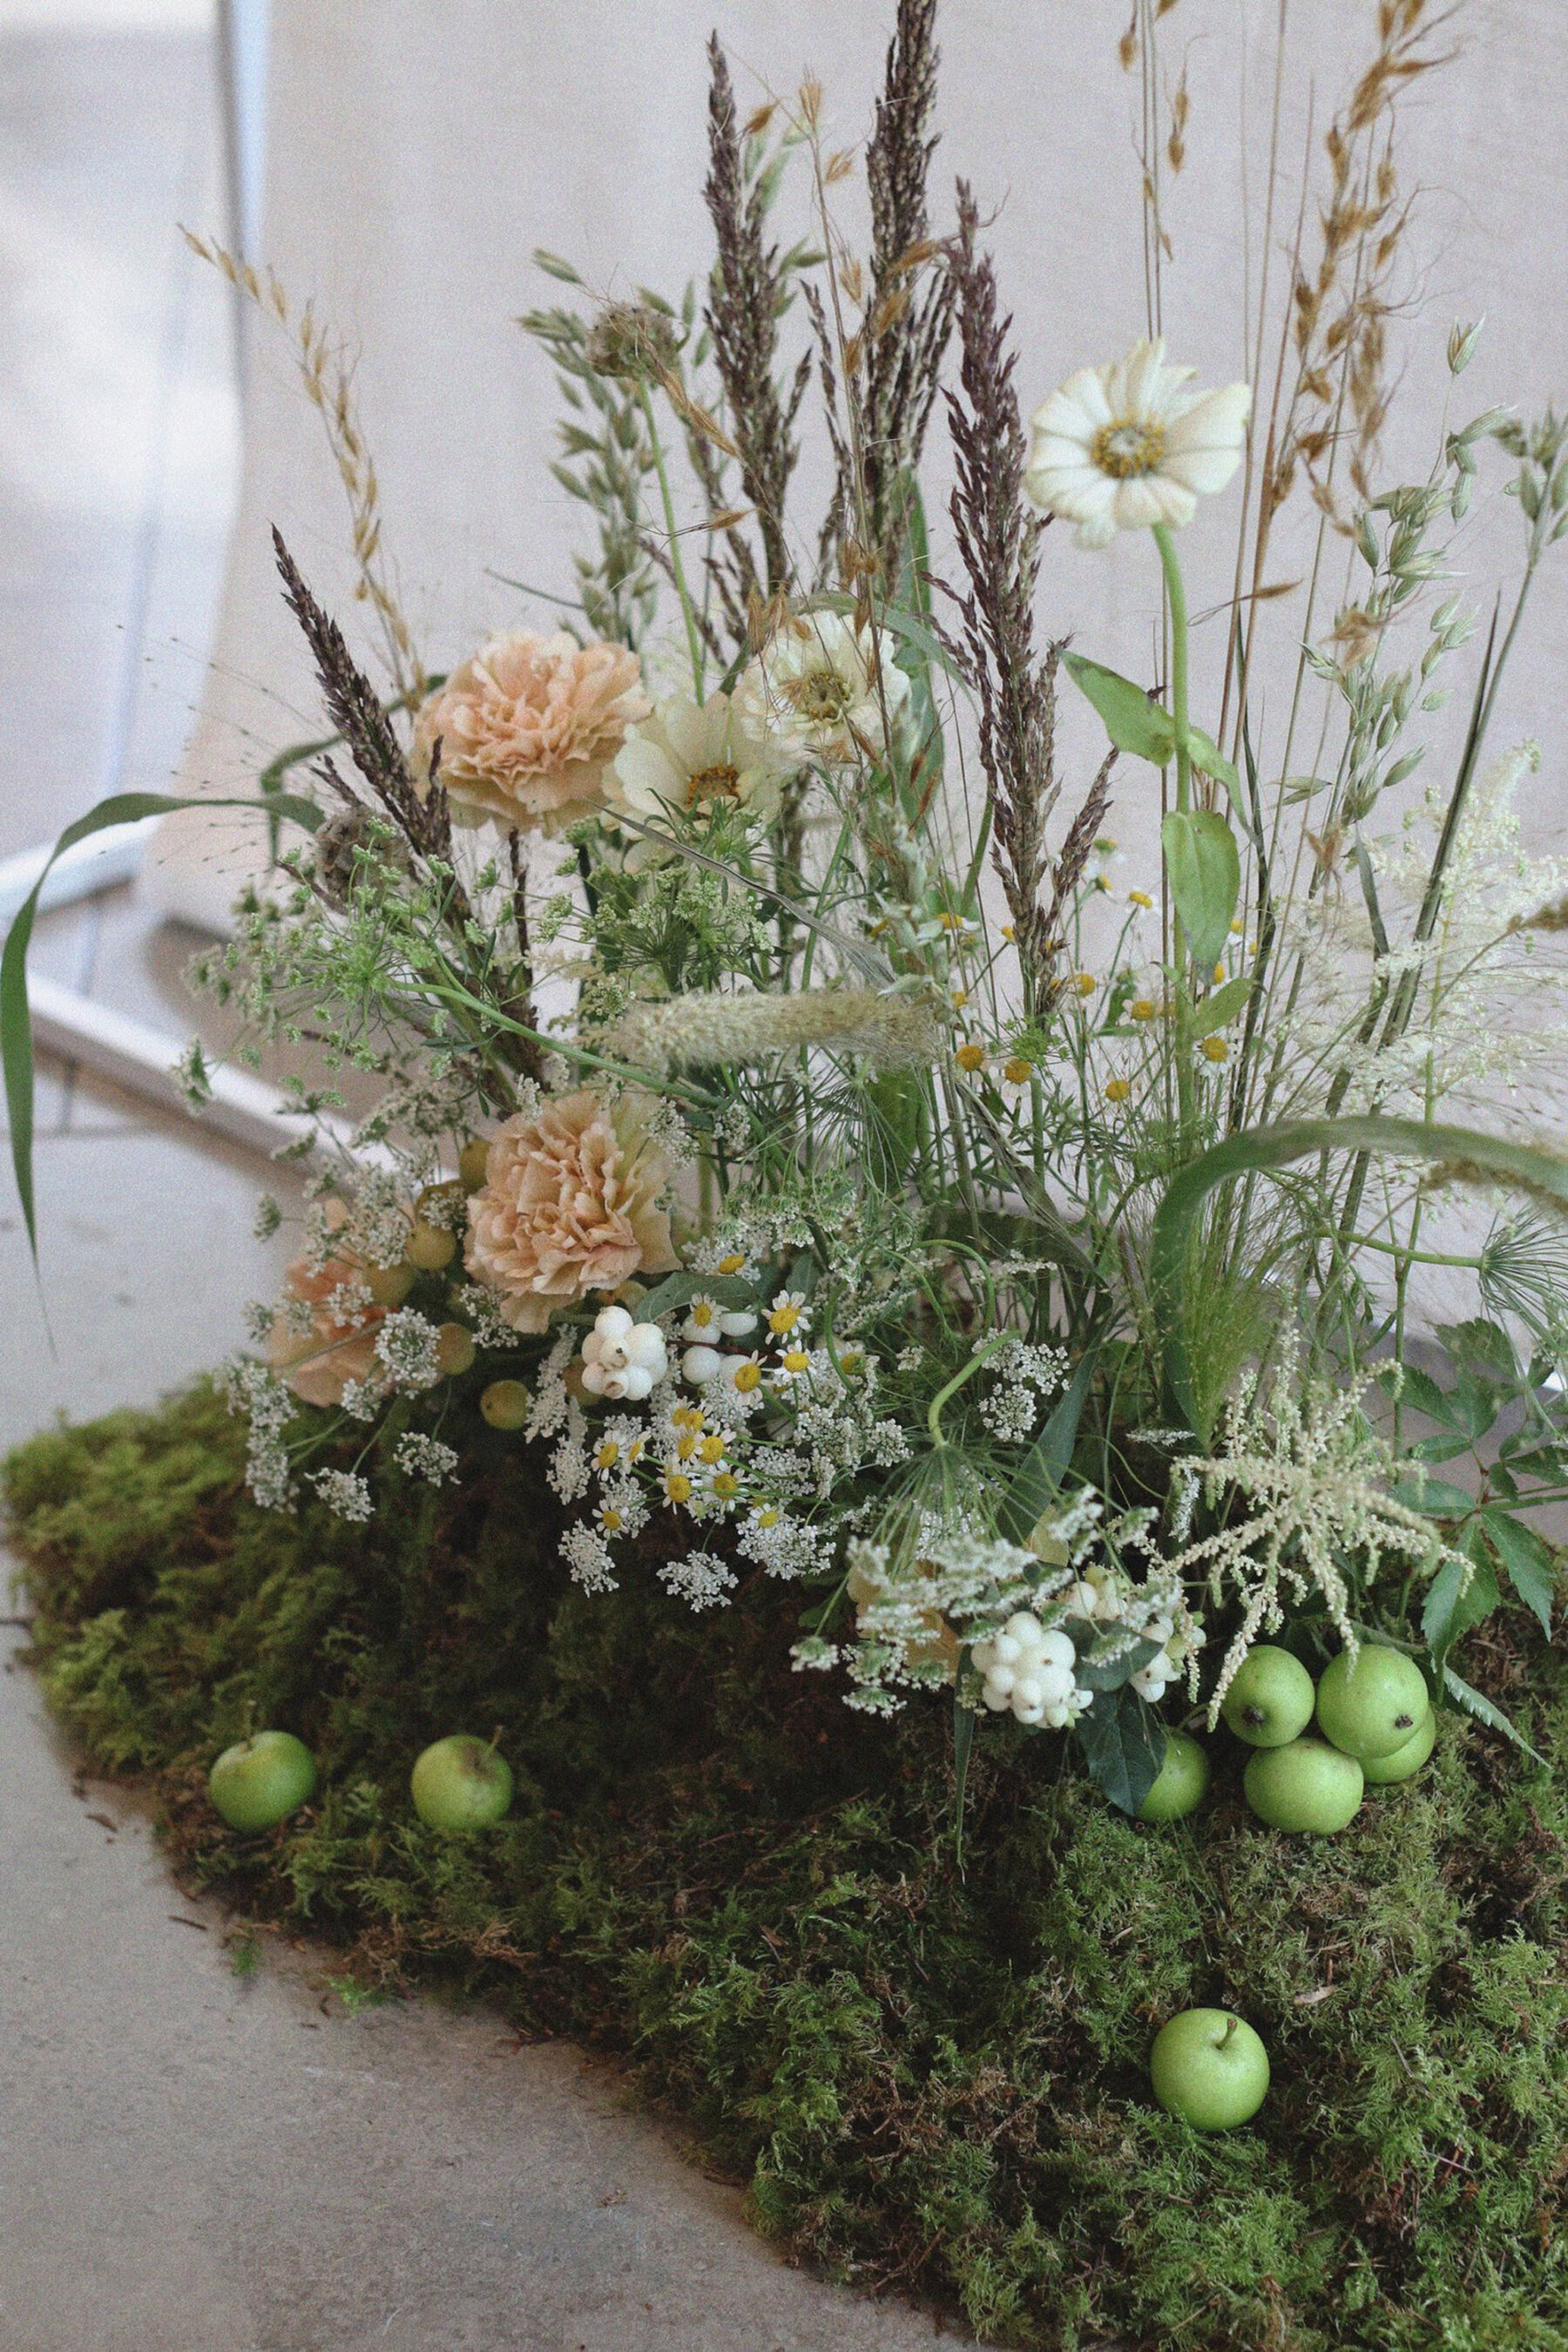 Floral Trends - Meadow wedding flowers styled with apples and moss, by Honour Farm Folk